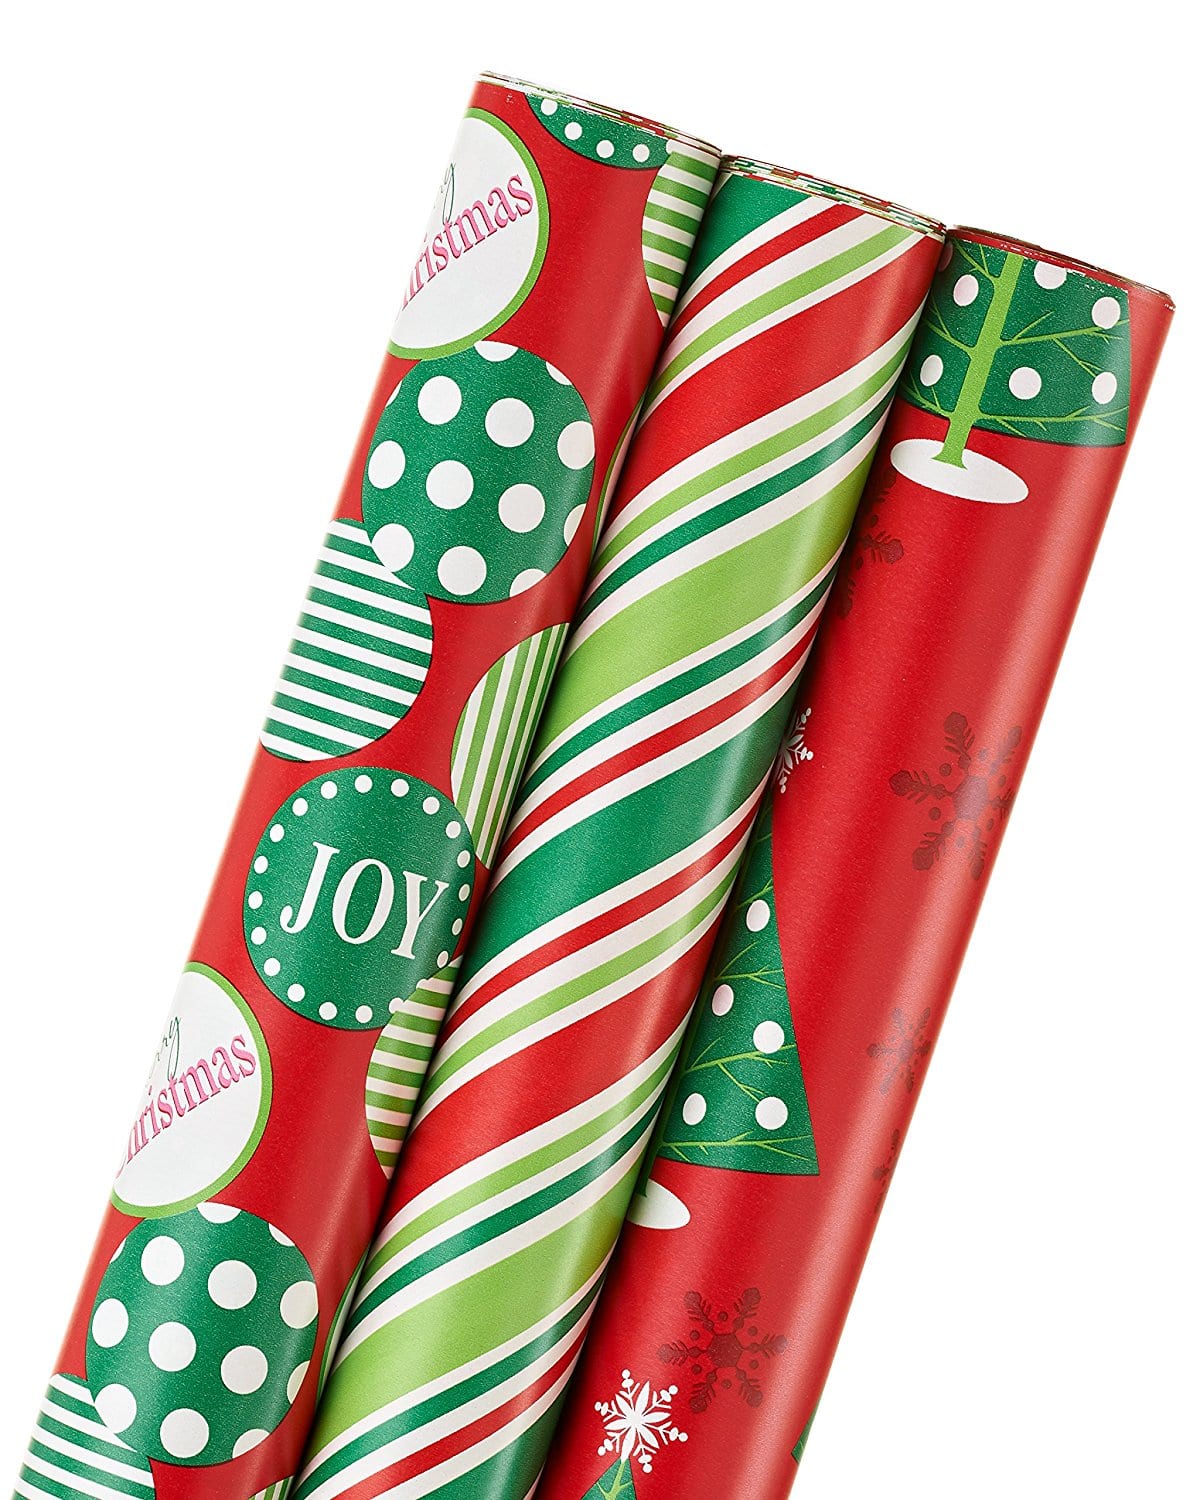 Christmas Wrapping Paper 2017: Christmas Rolls Wrap 2018